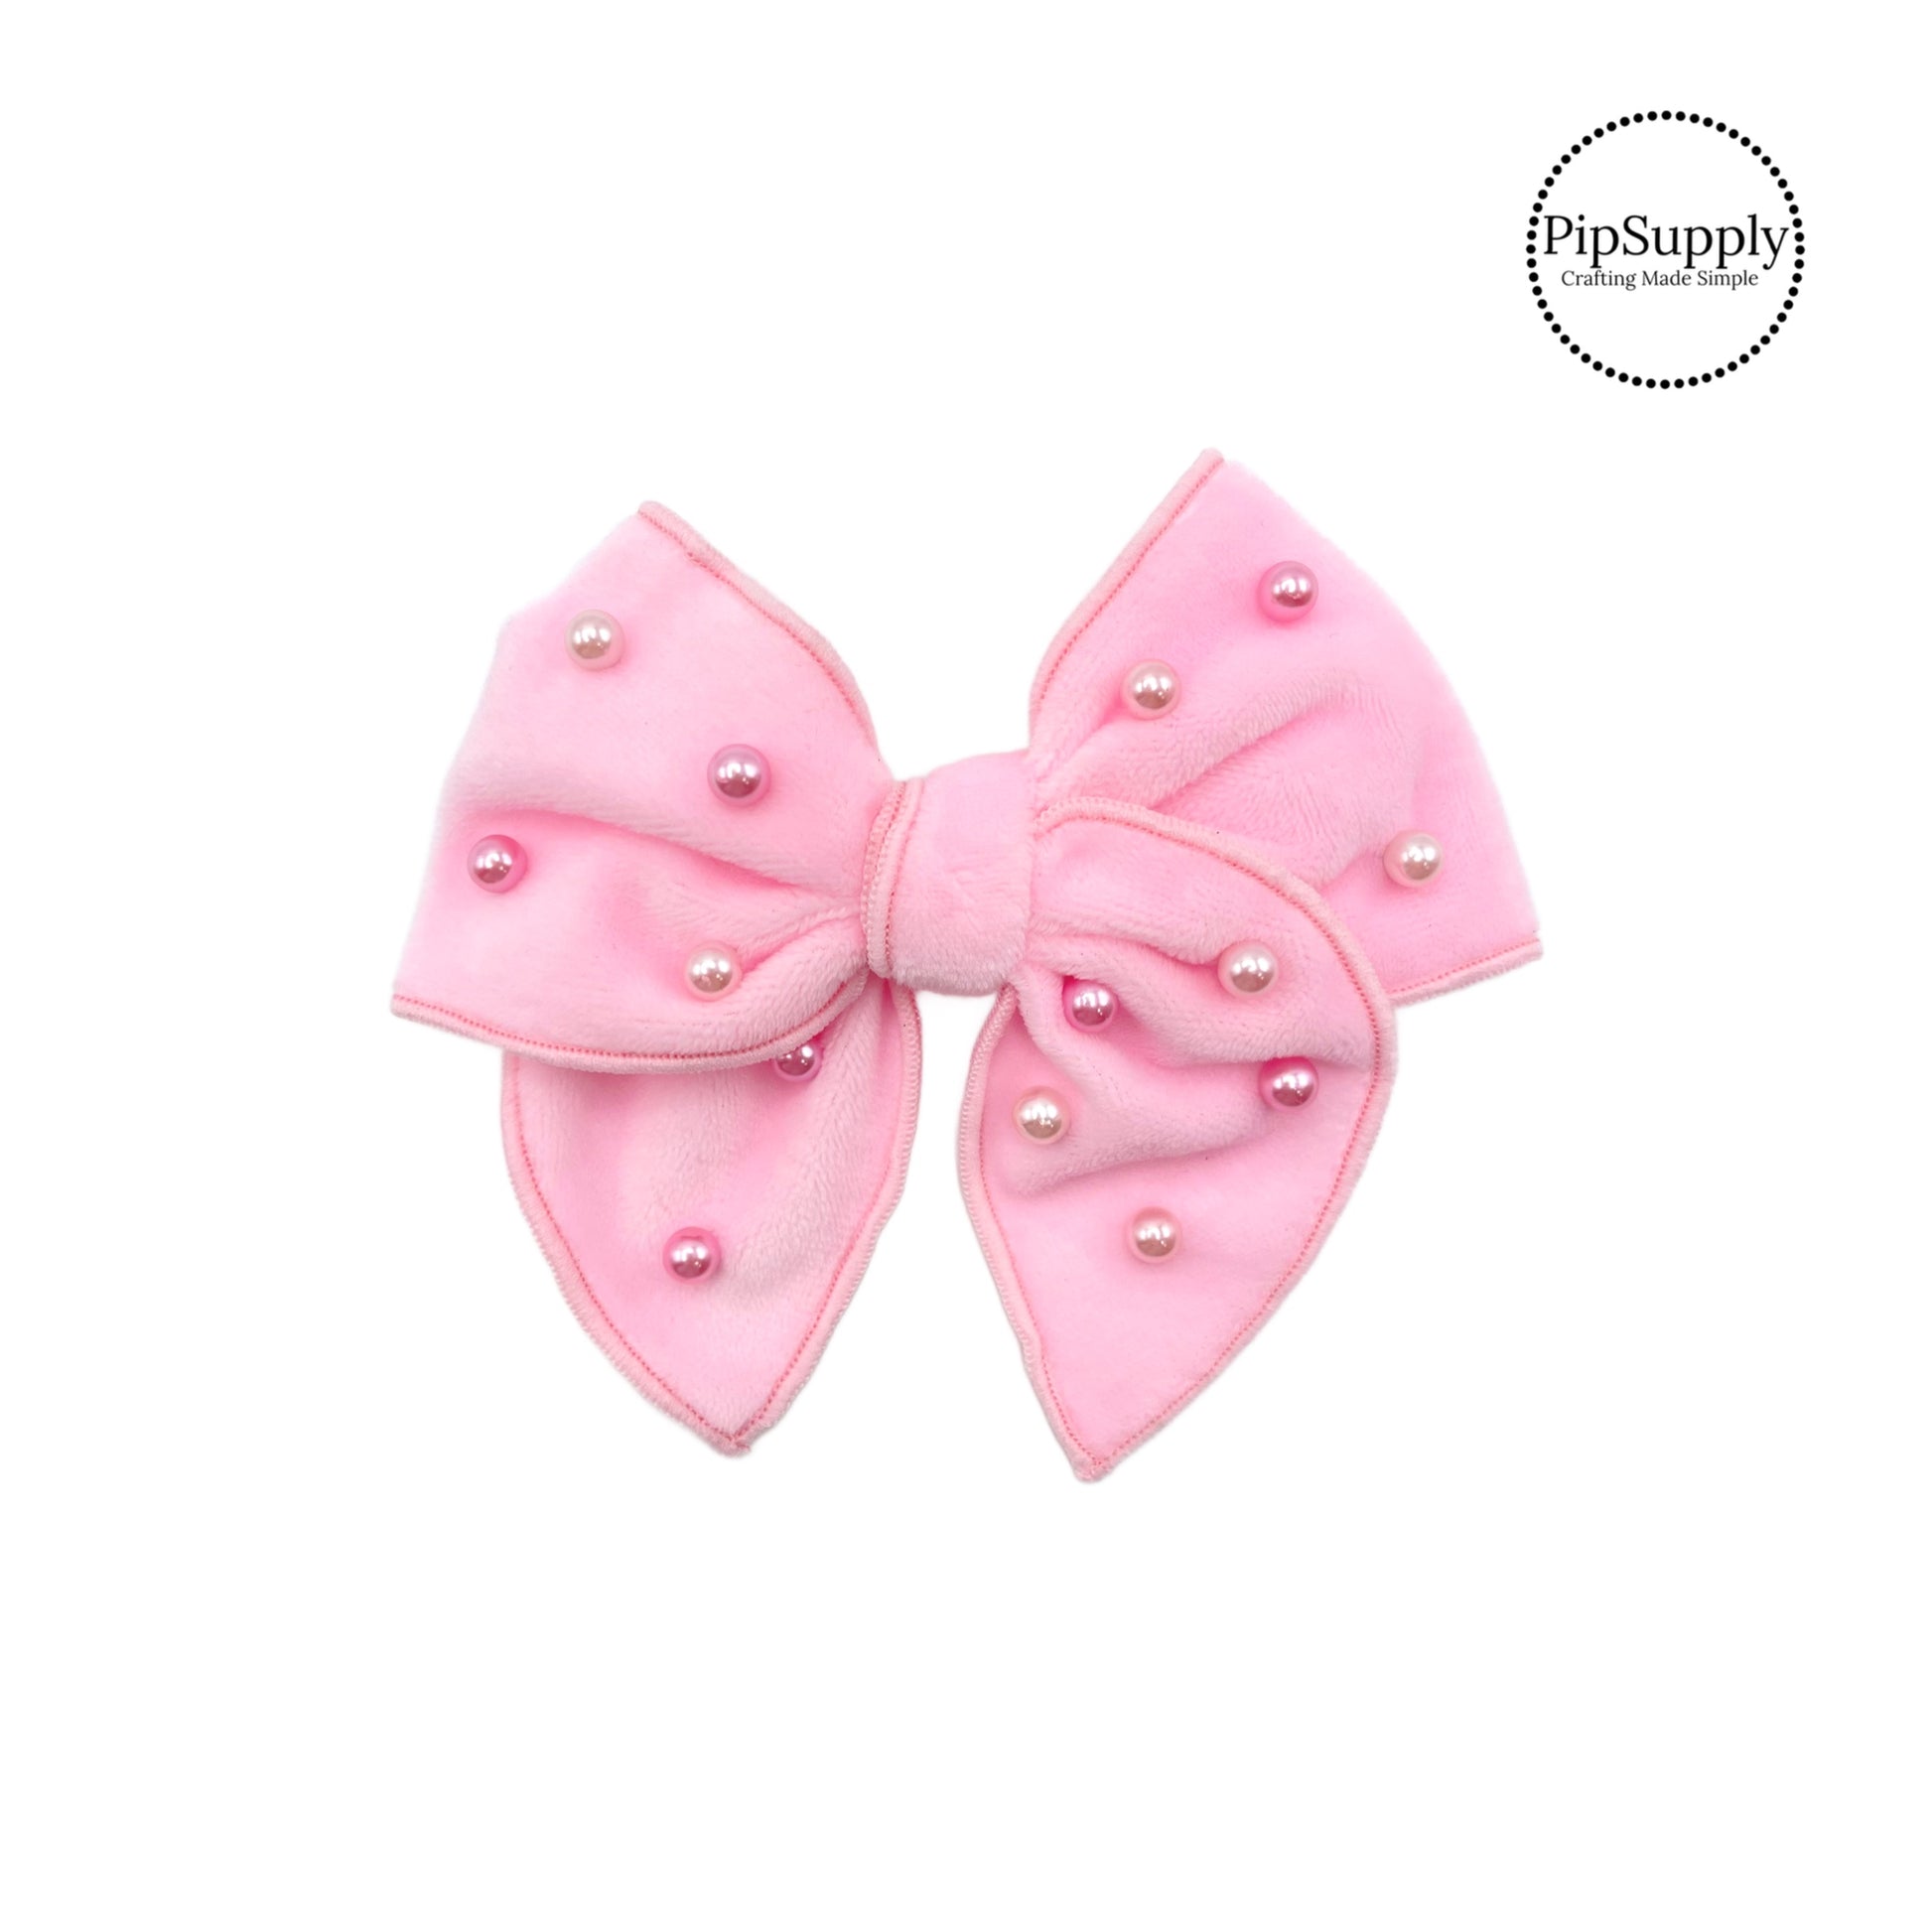 These light pink velvet pre-cut bow strips are ready to package and resell to your customers no sewing or measuring necessary! These hair bows come with a alligator clip already attached. The pearls are hand stitched on the light pink velvet hair bow.